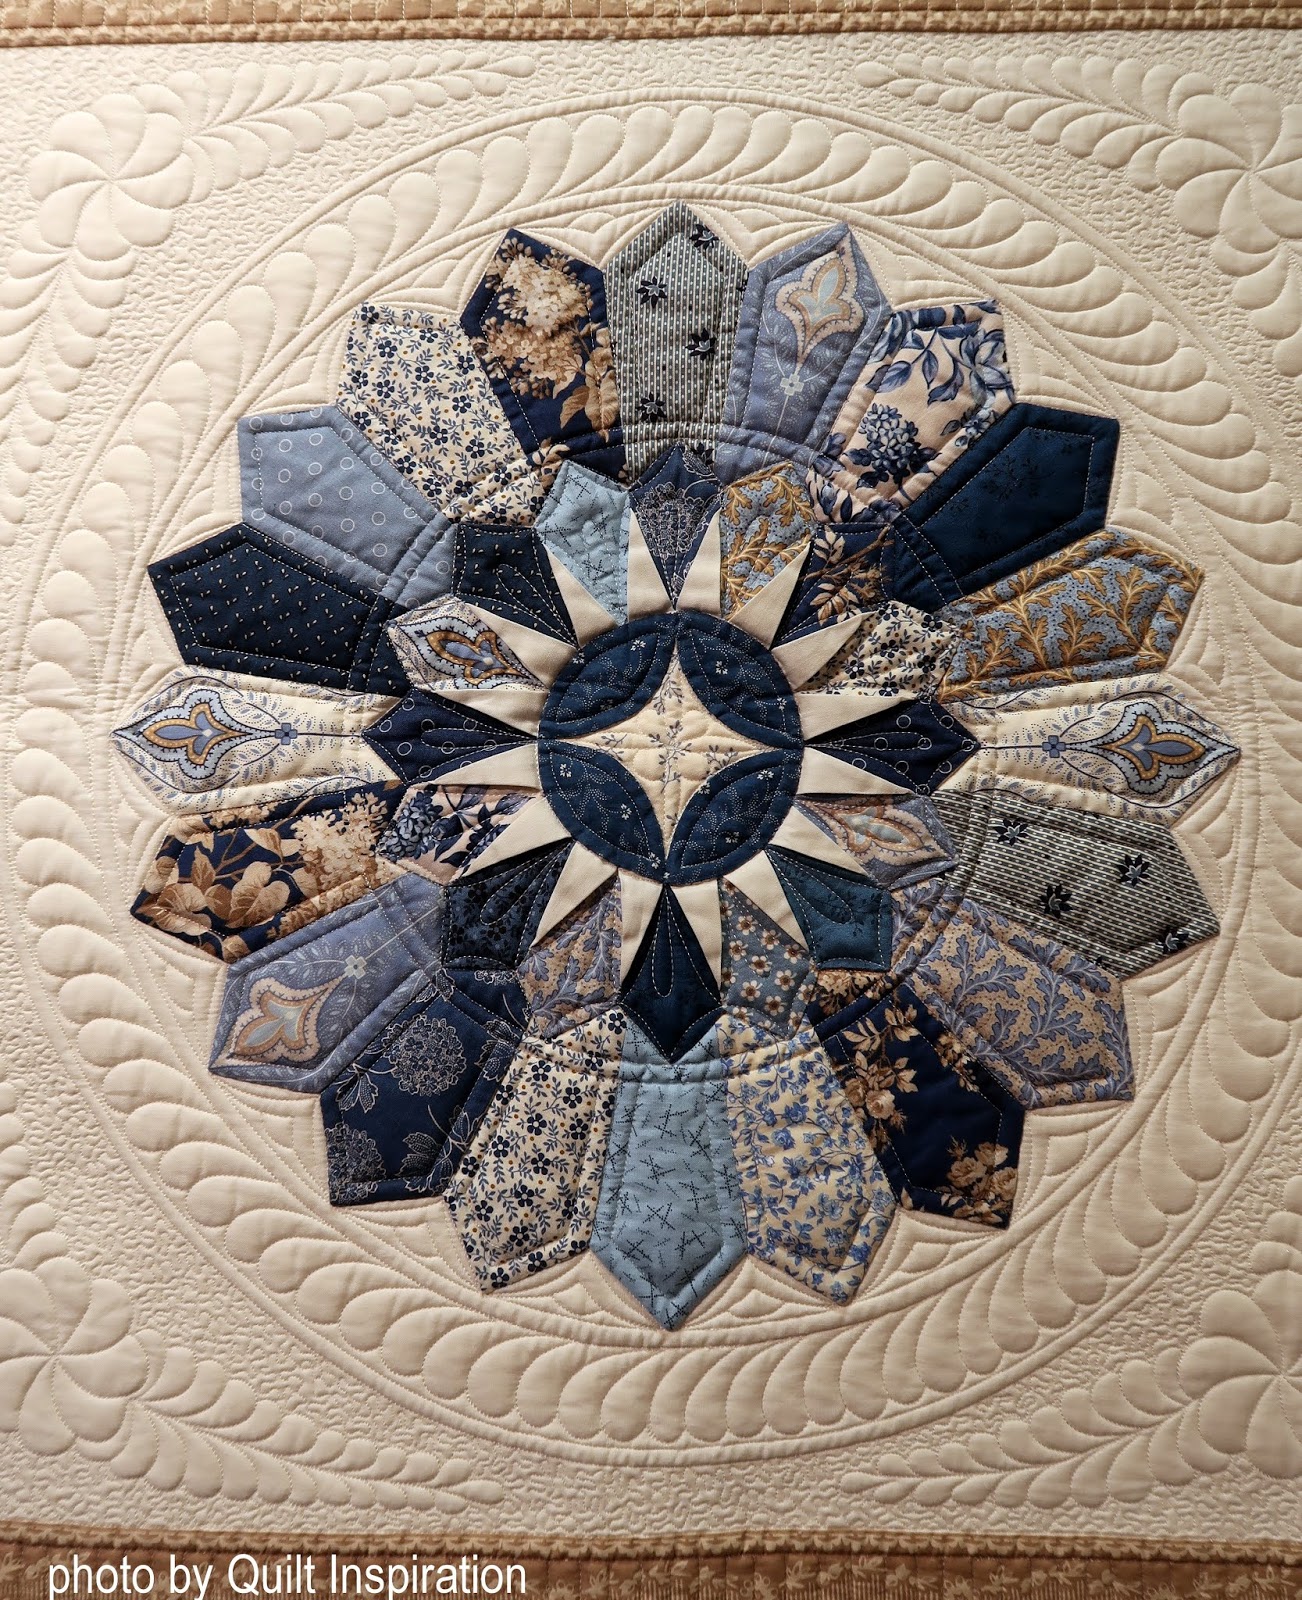 Quilt Inspiration: Highlights of Quilt Arizona 2019! part 5 (the finale)